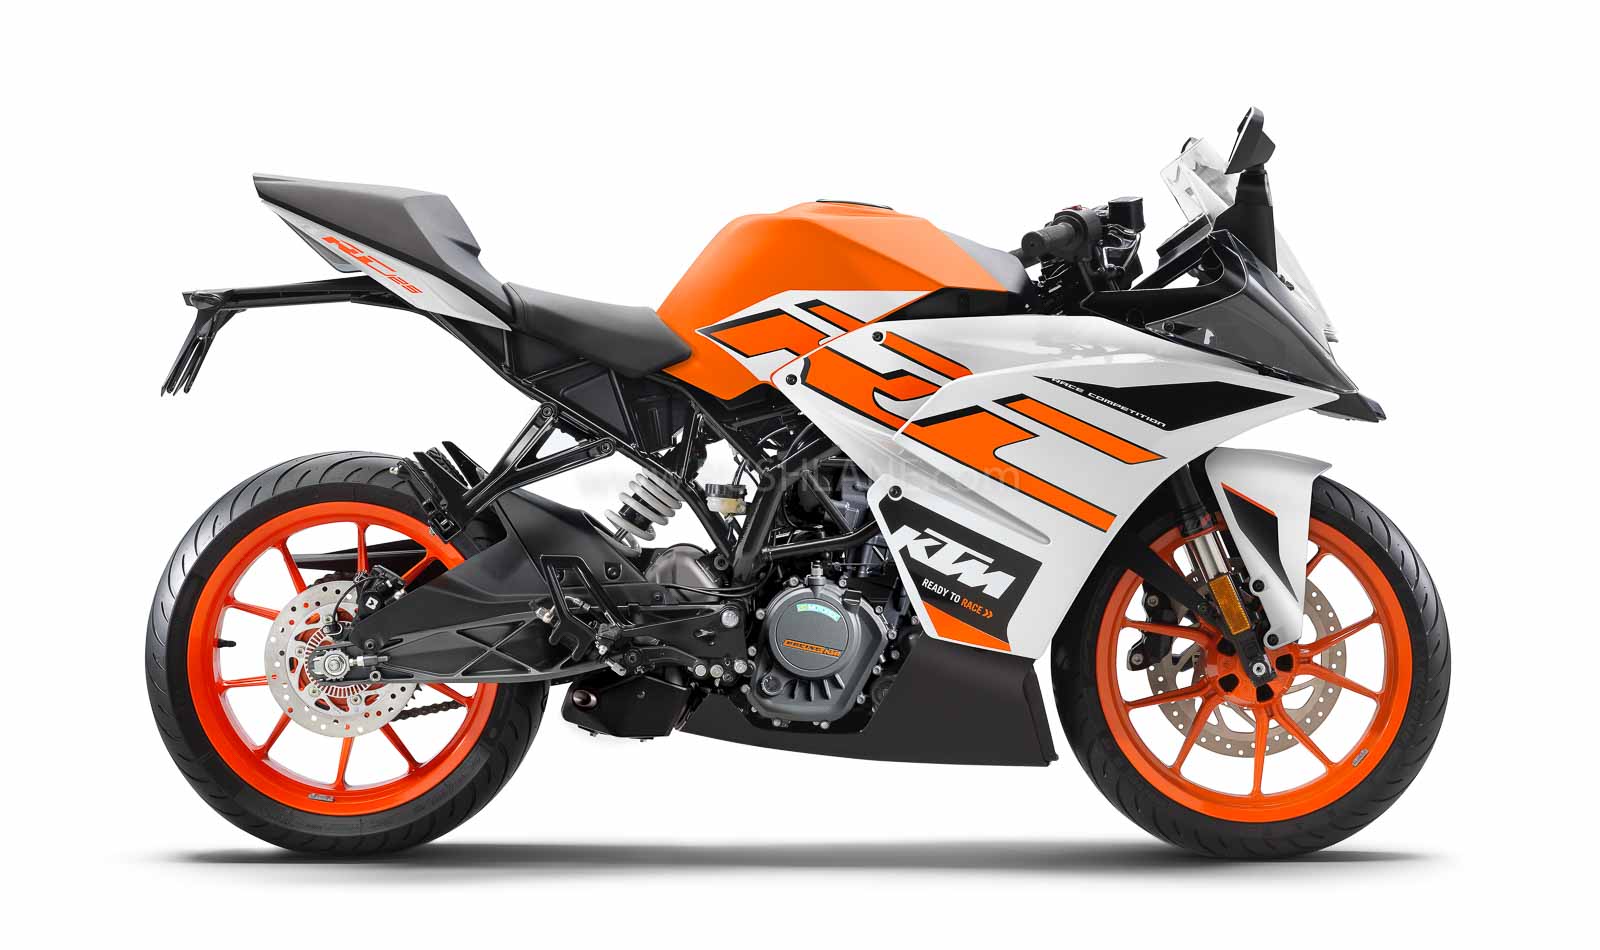 BS6 KTM Duke and RC motorcycles launched, Specs, Photo